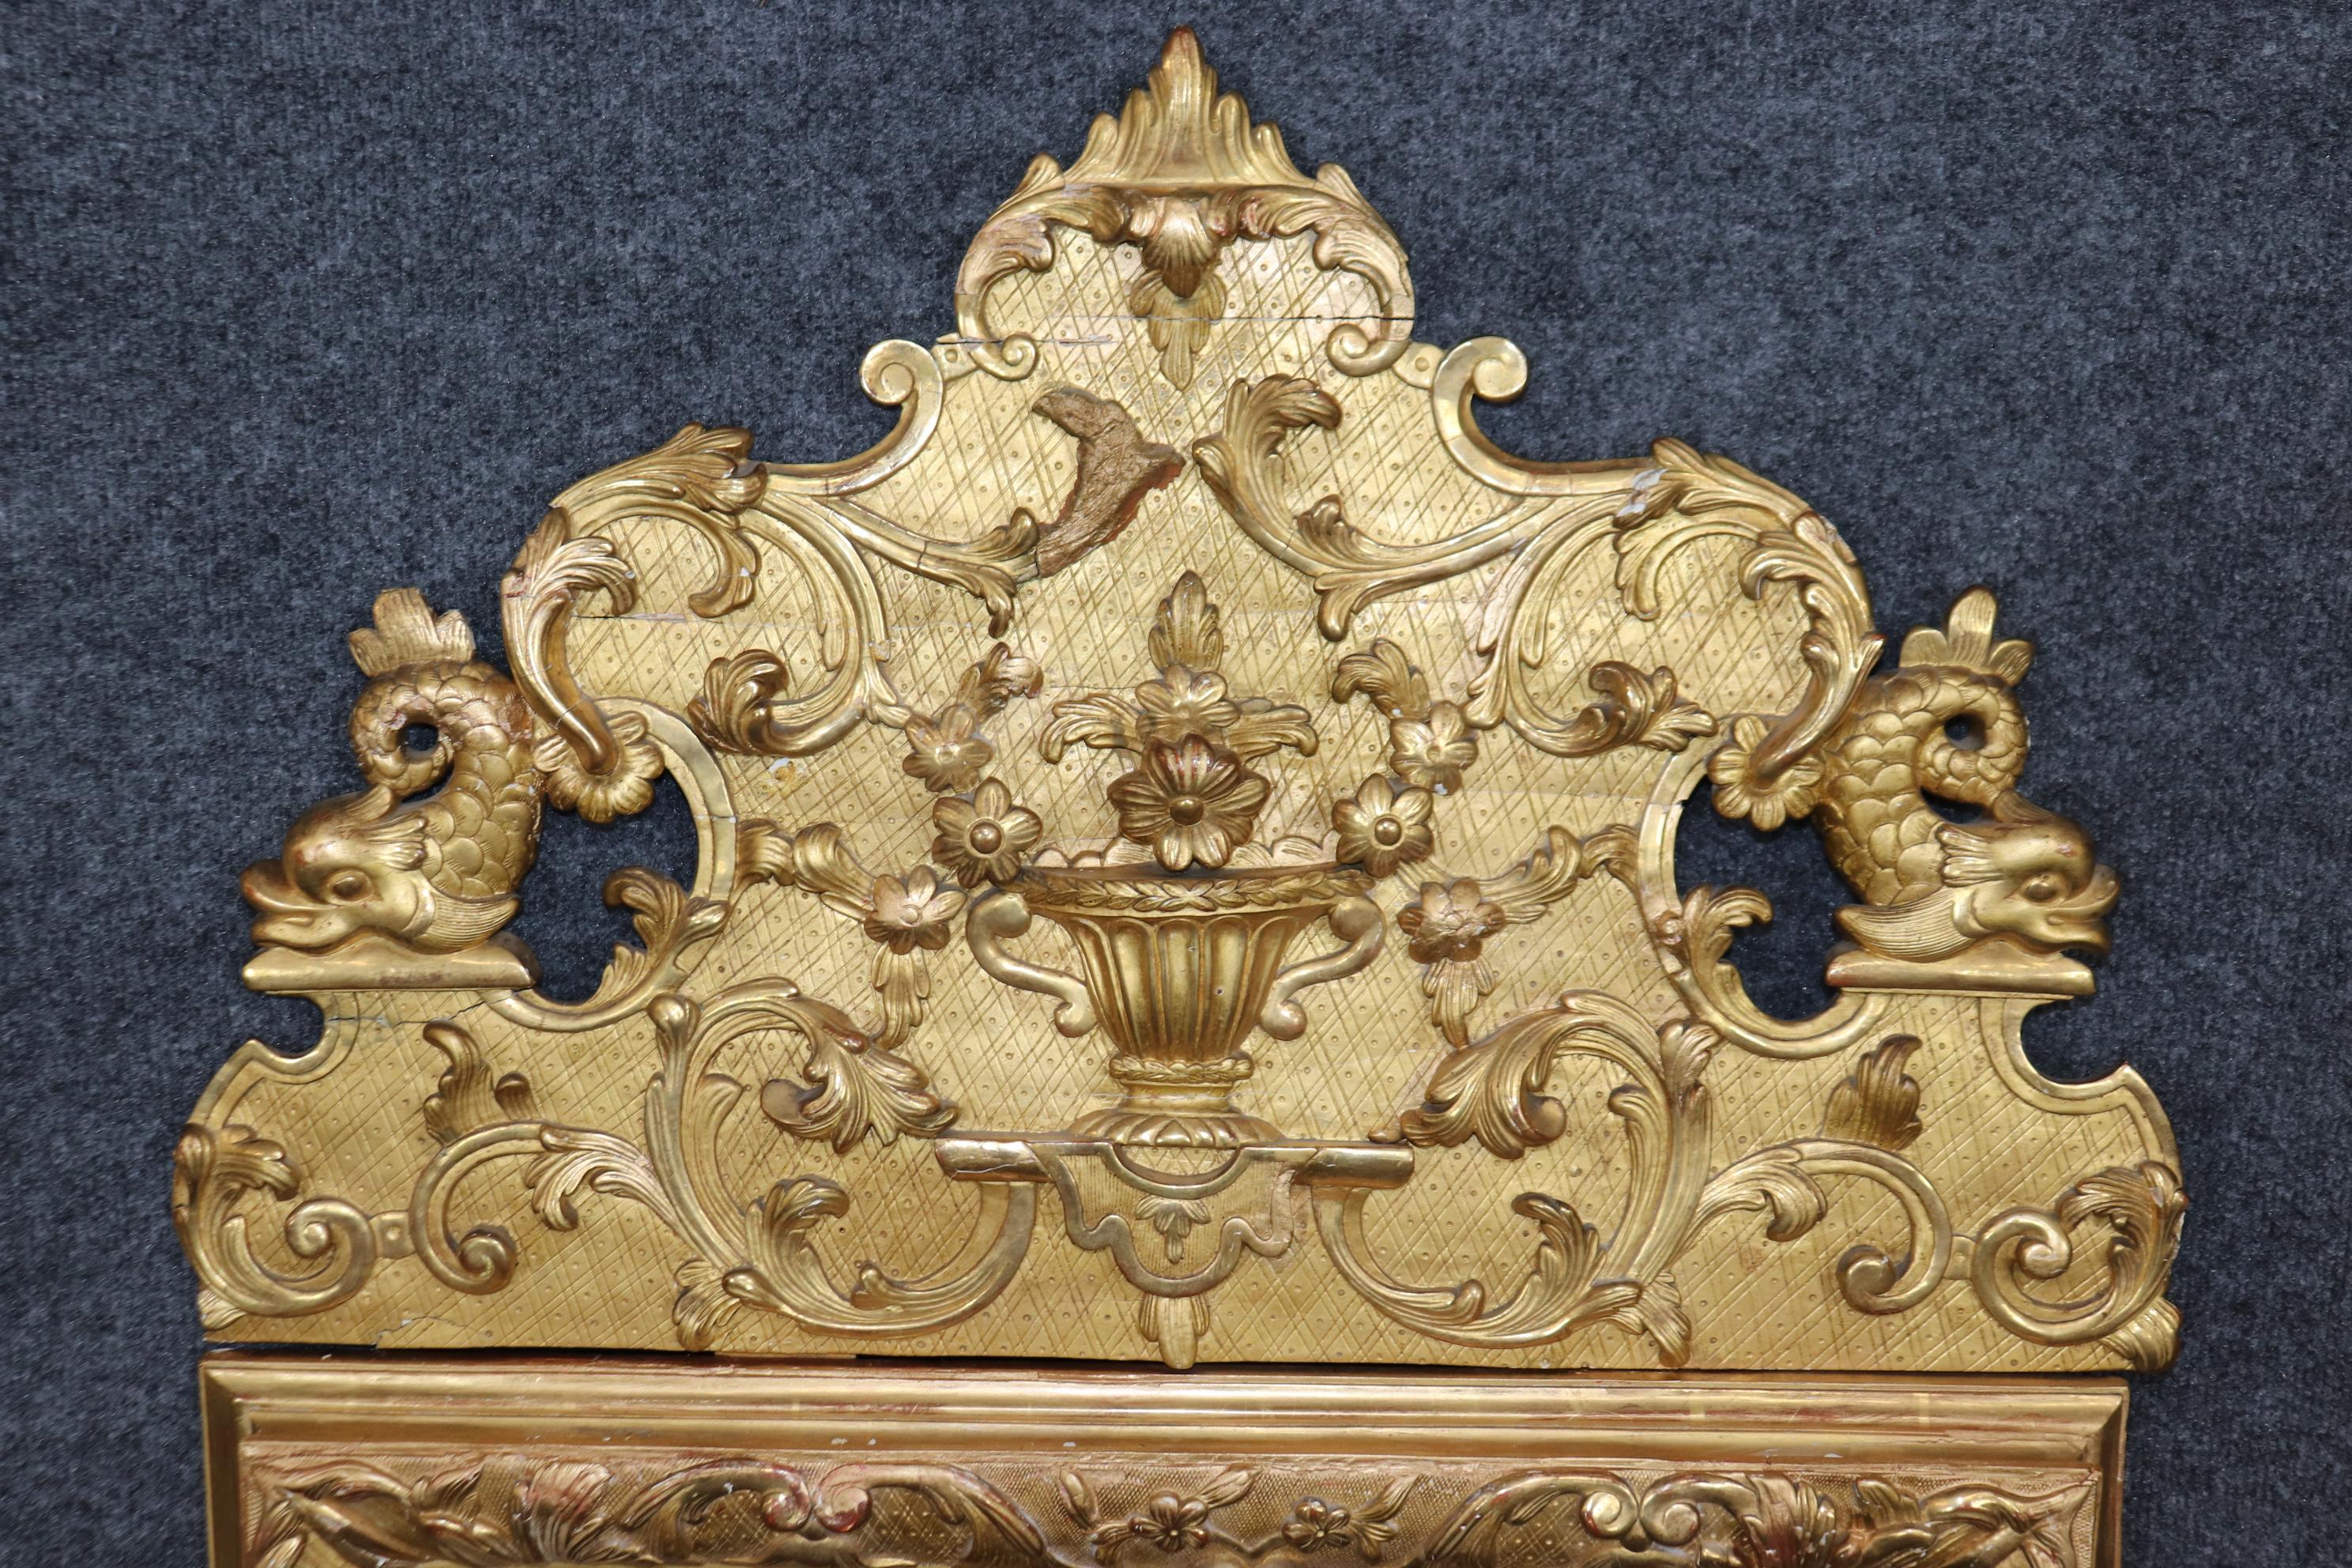 This is truly superb mirror with the brightest gilding and gorgeous carved details of flowers and various elements. There is a partial manufacturer signature on the back. The mirror plate is antique and has signs of age and patina including spots